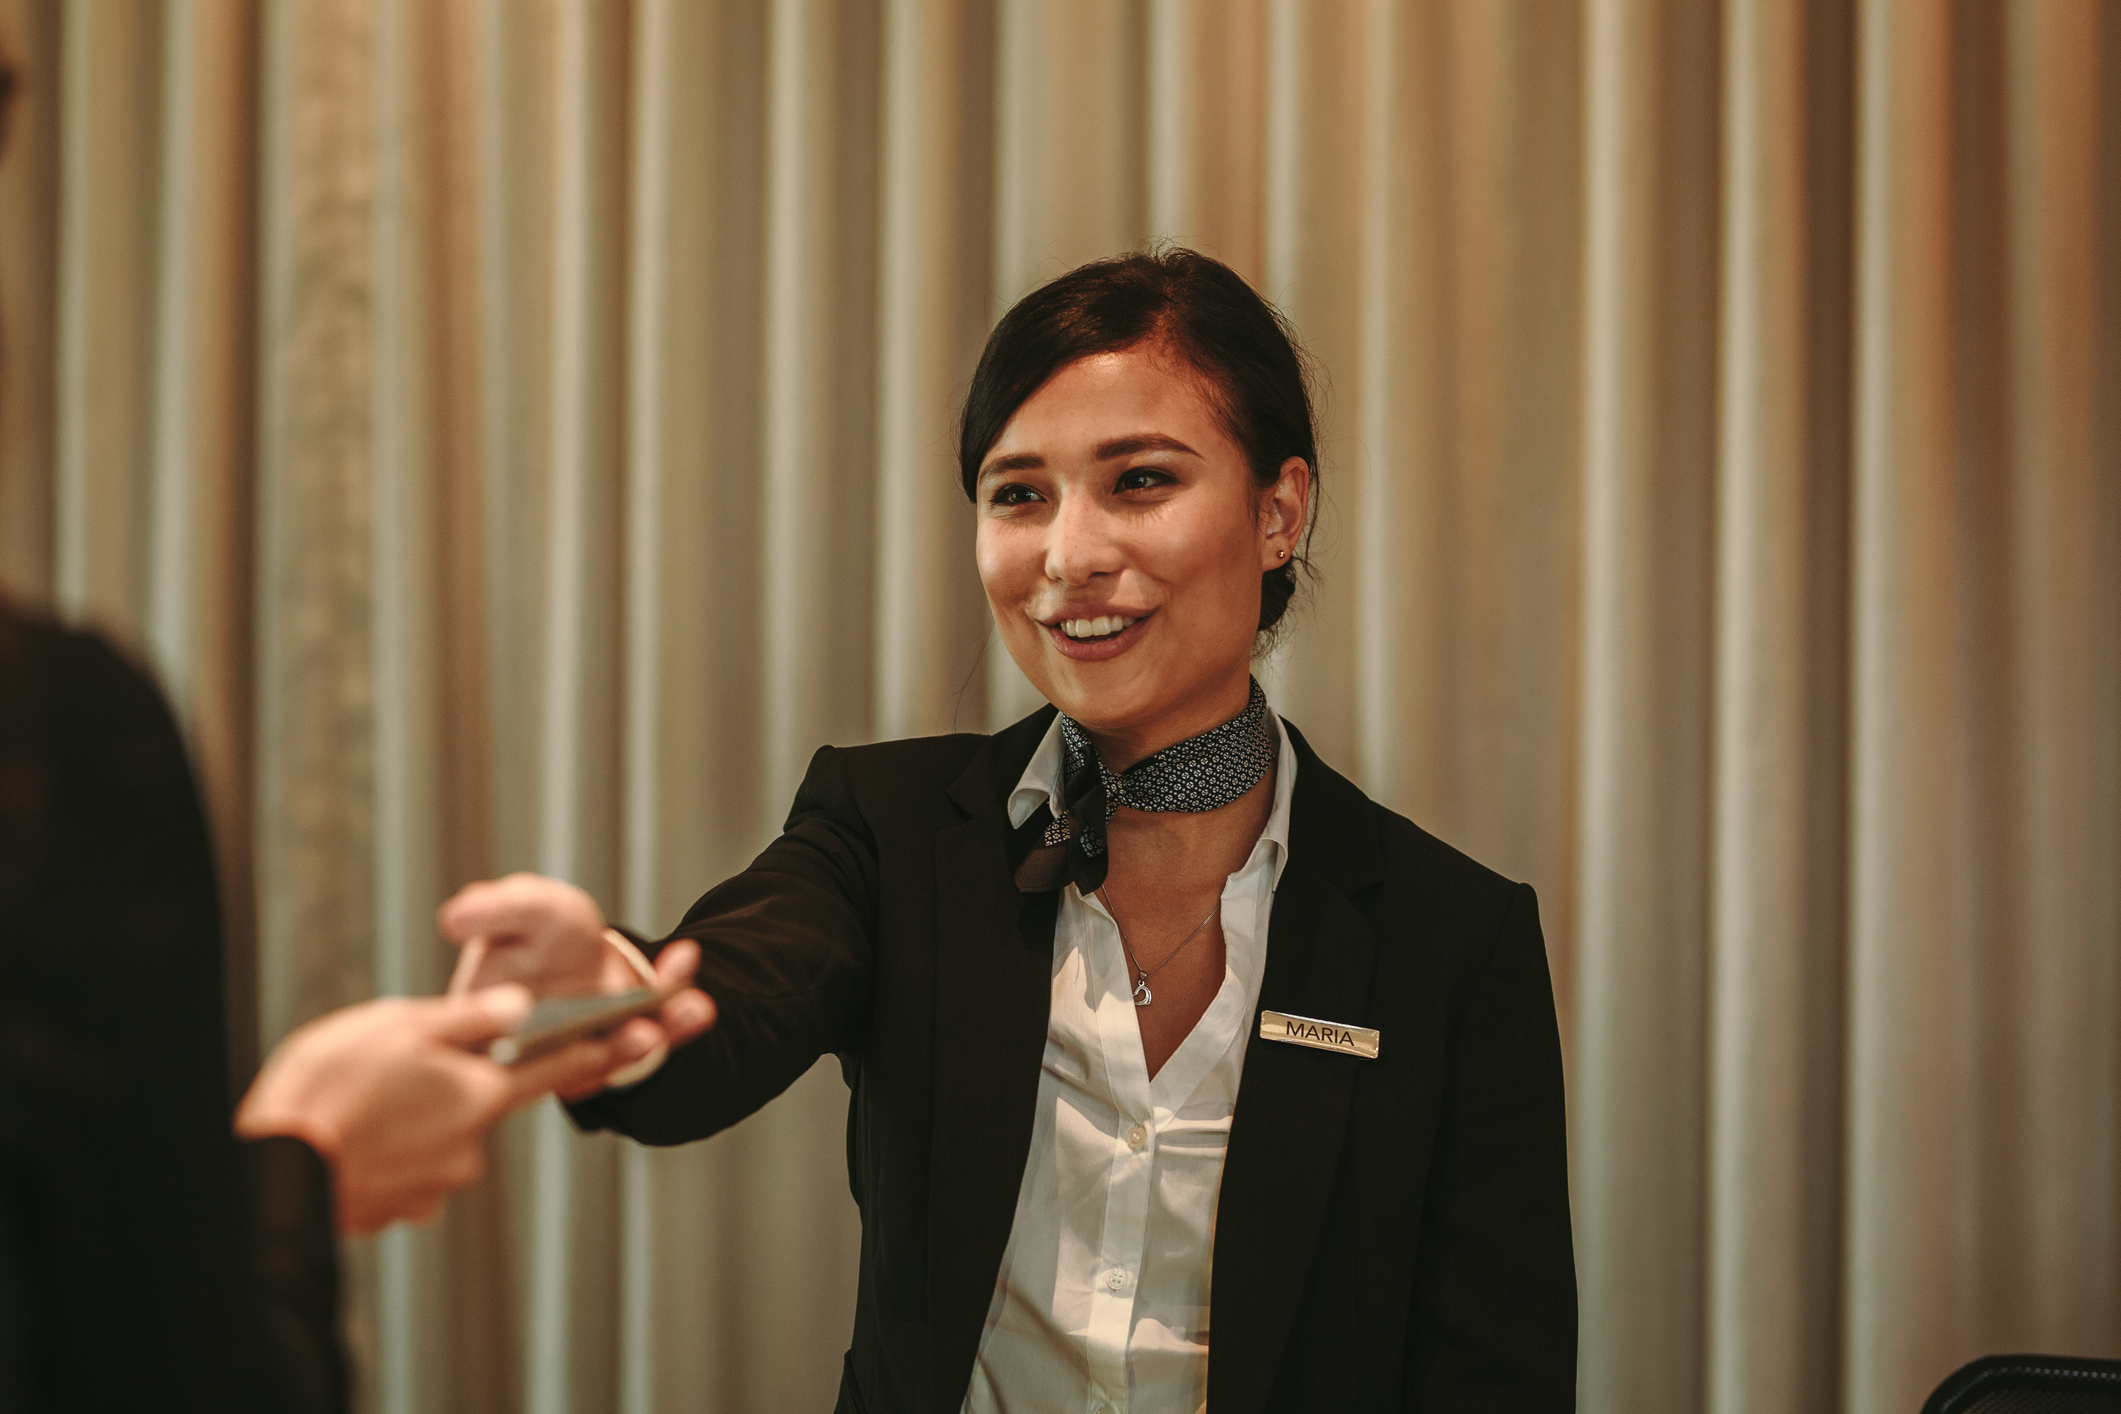 5 Factors That Determine Job Satisfaction in the Hospitality Industry